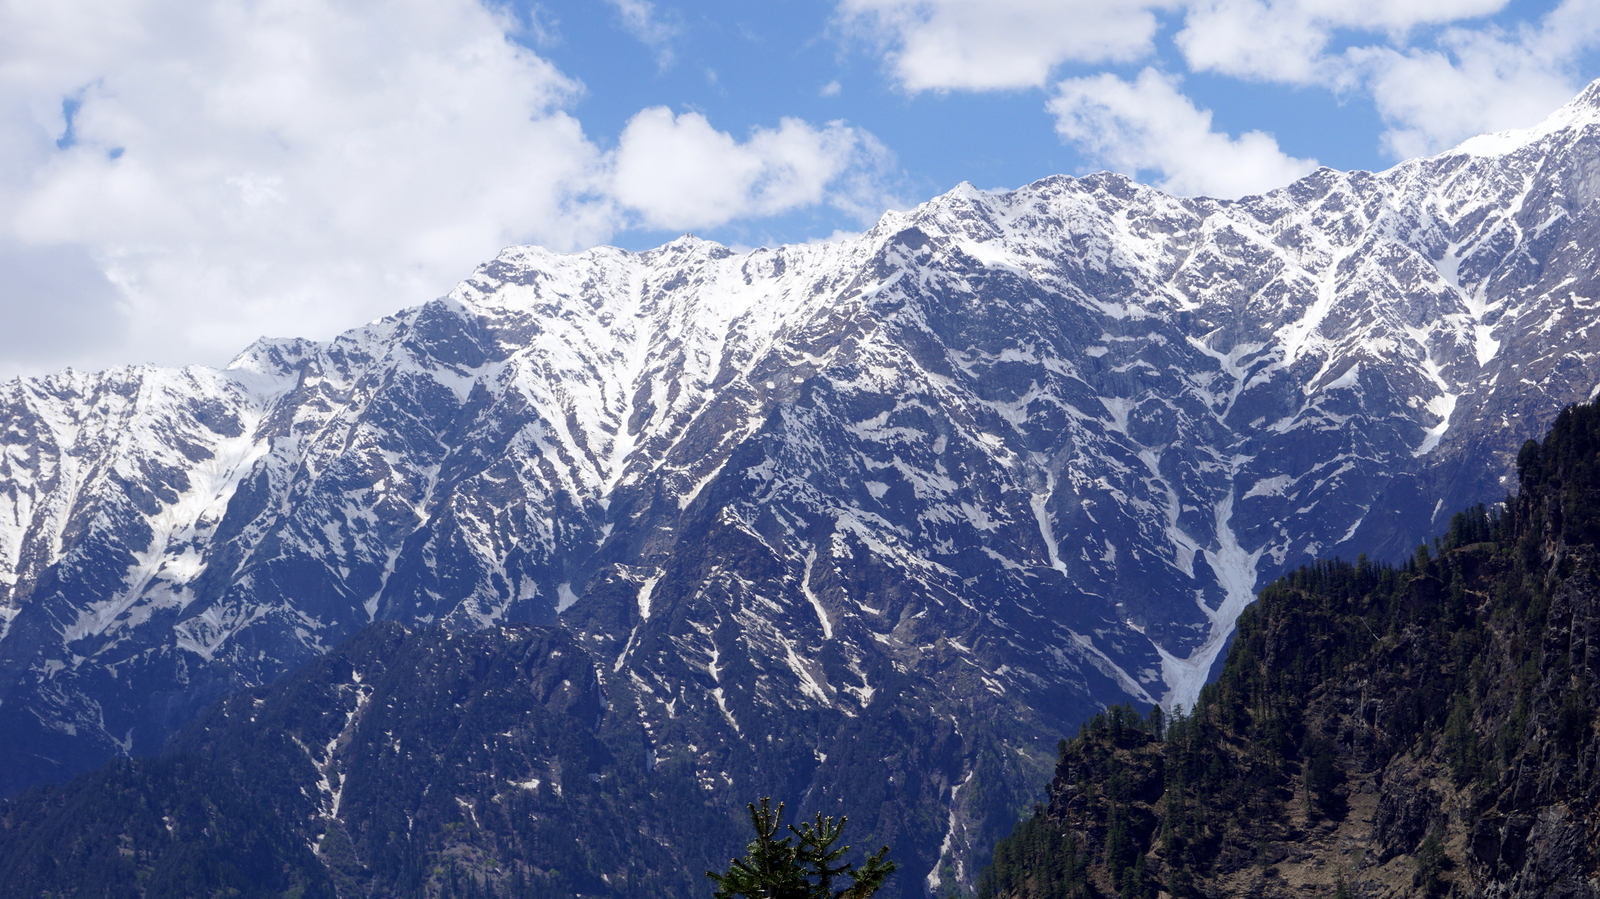 Snow clad mountains in the region of north india